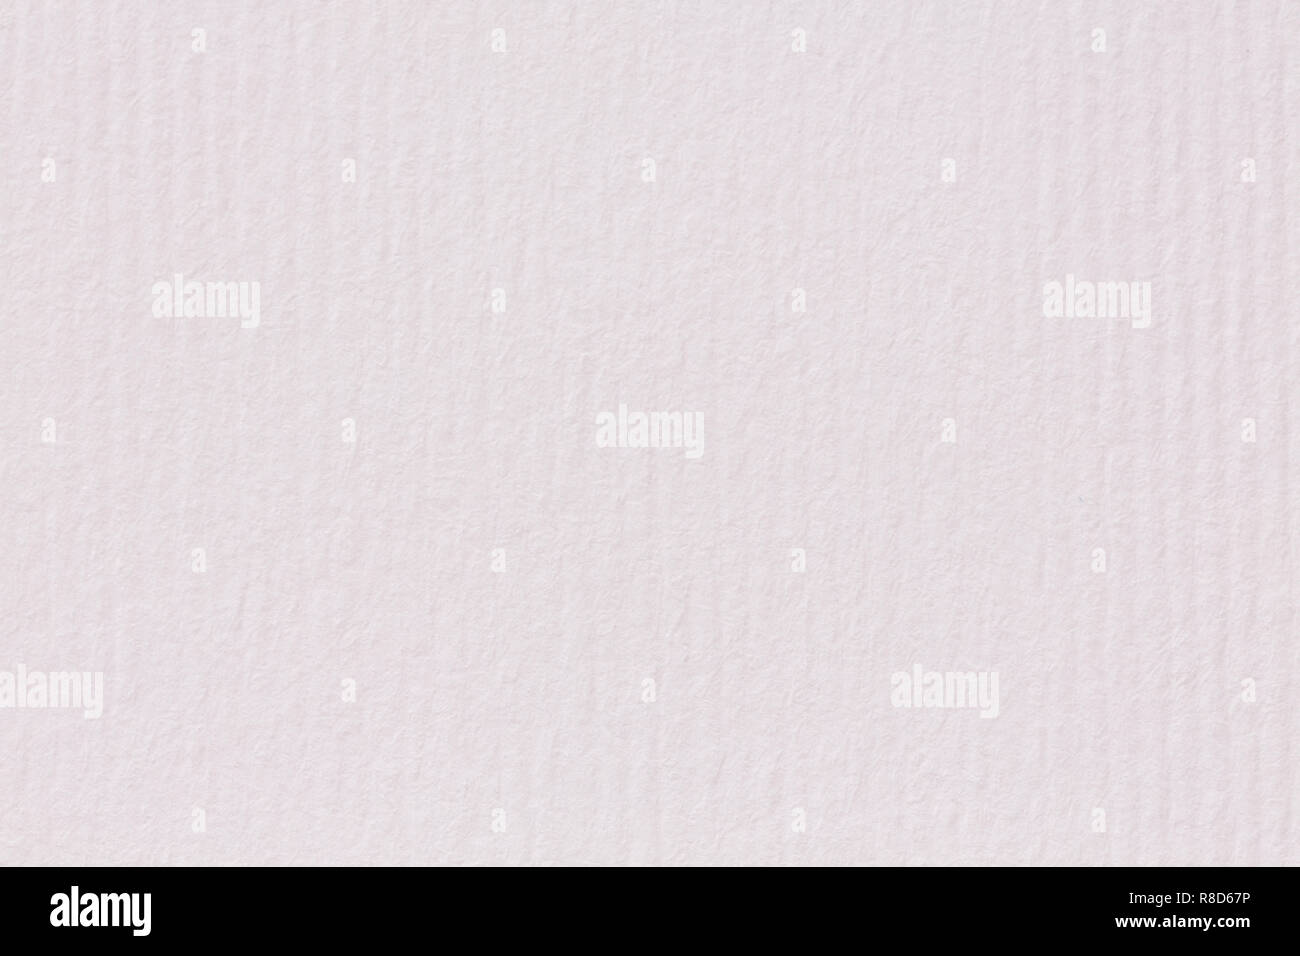 Close up of clean light pink paper texture. Stock Photo